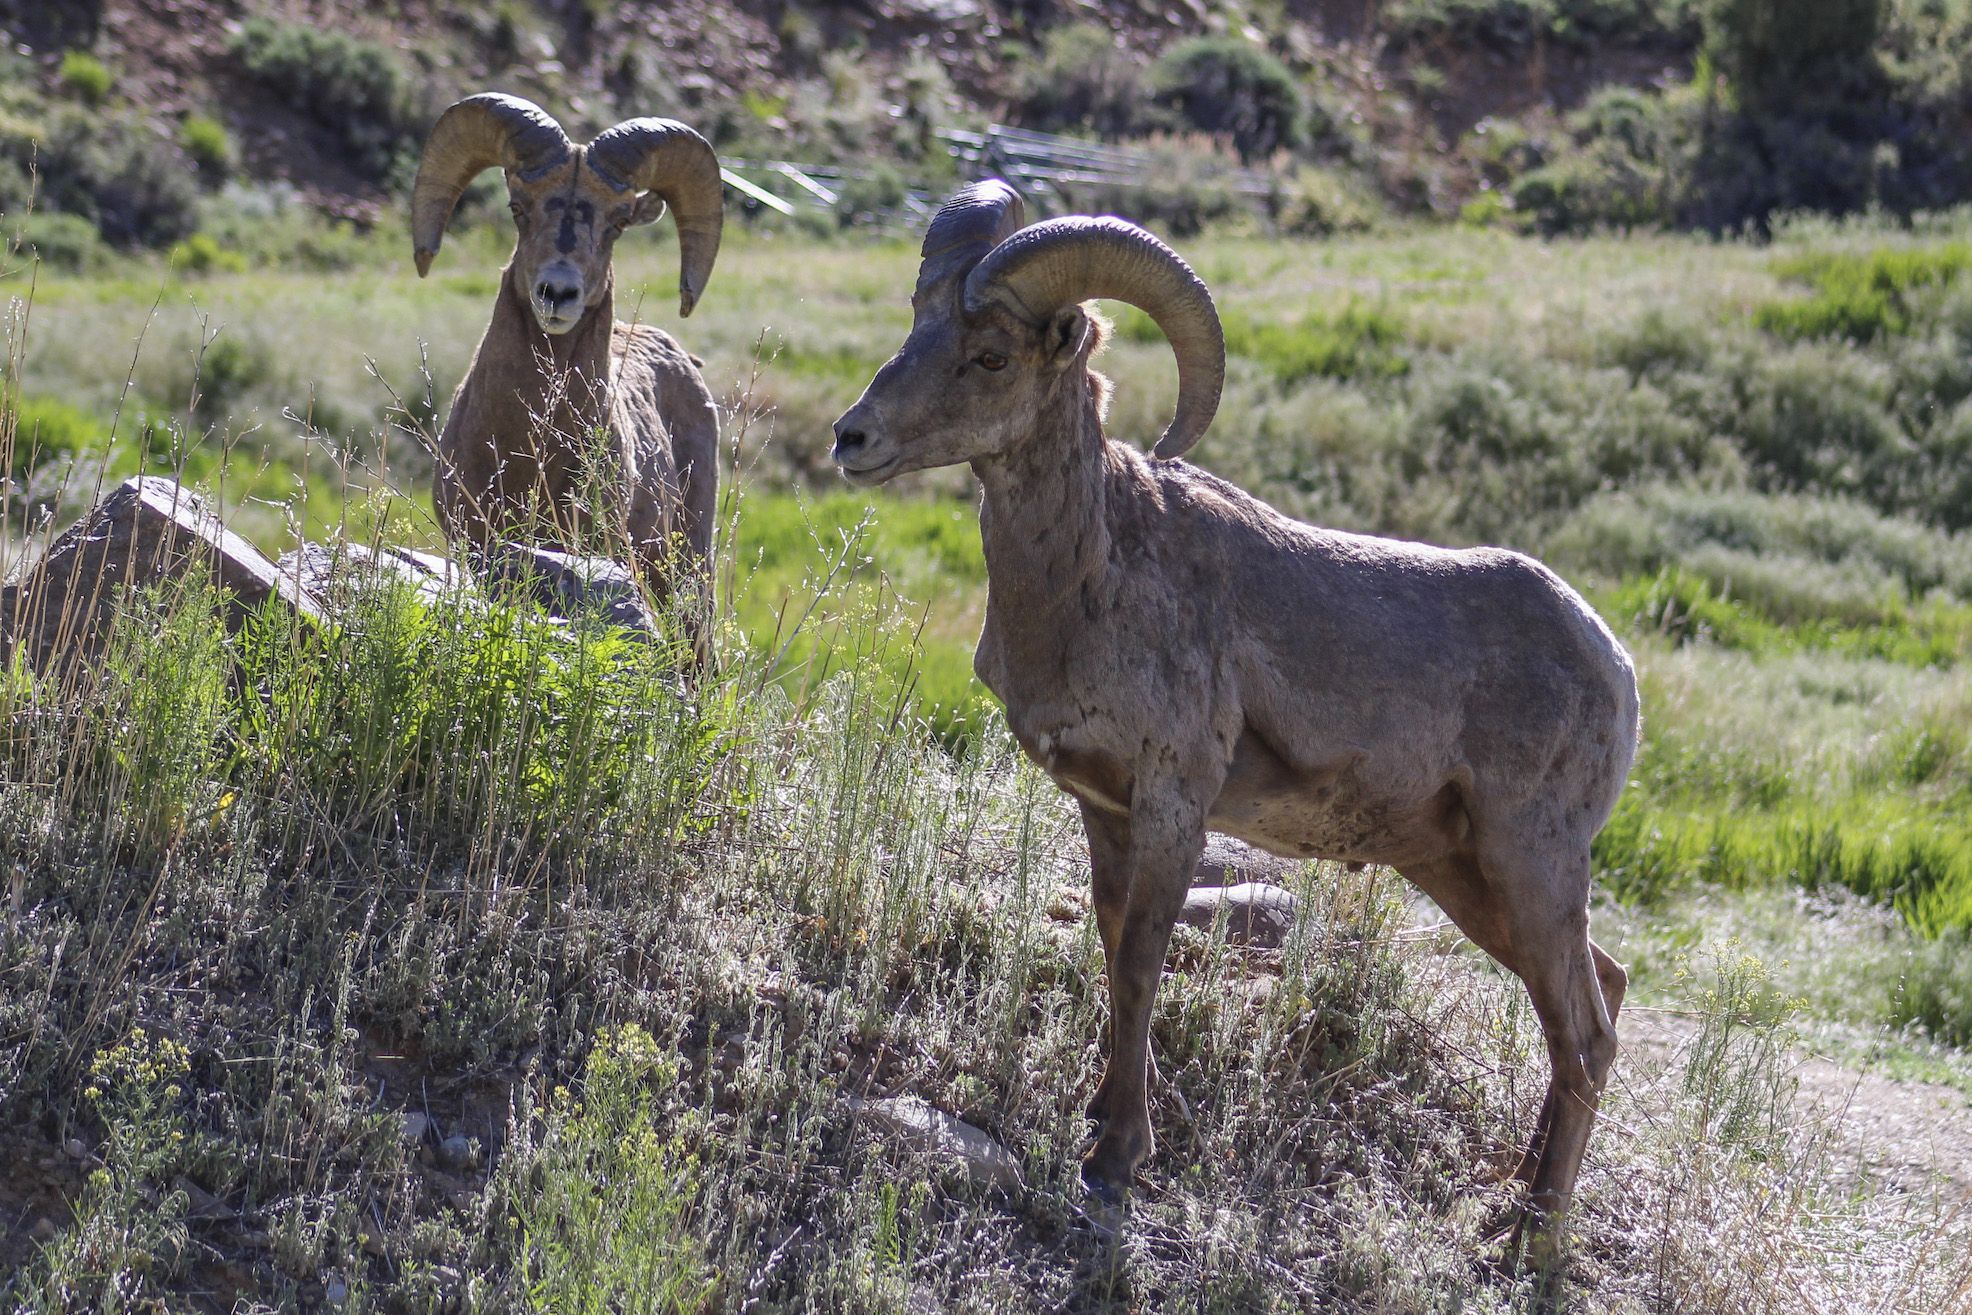 Sheep by the side of the road. A bighorn sheep herd likes to hang out in Almont, CO and lick the salt off the road.